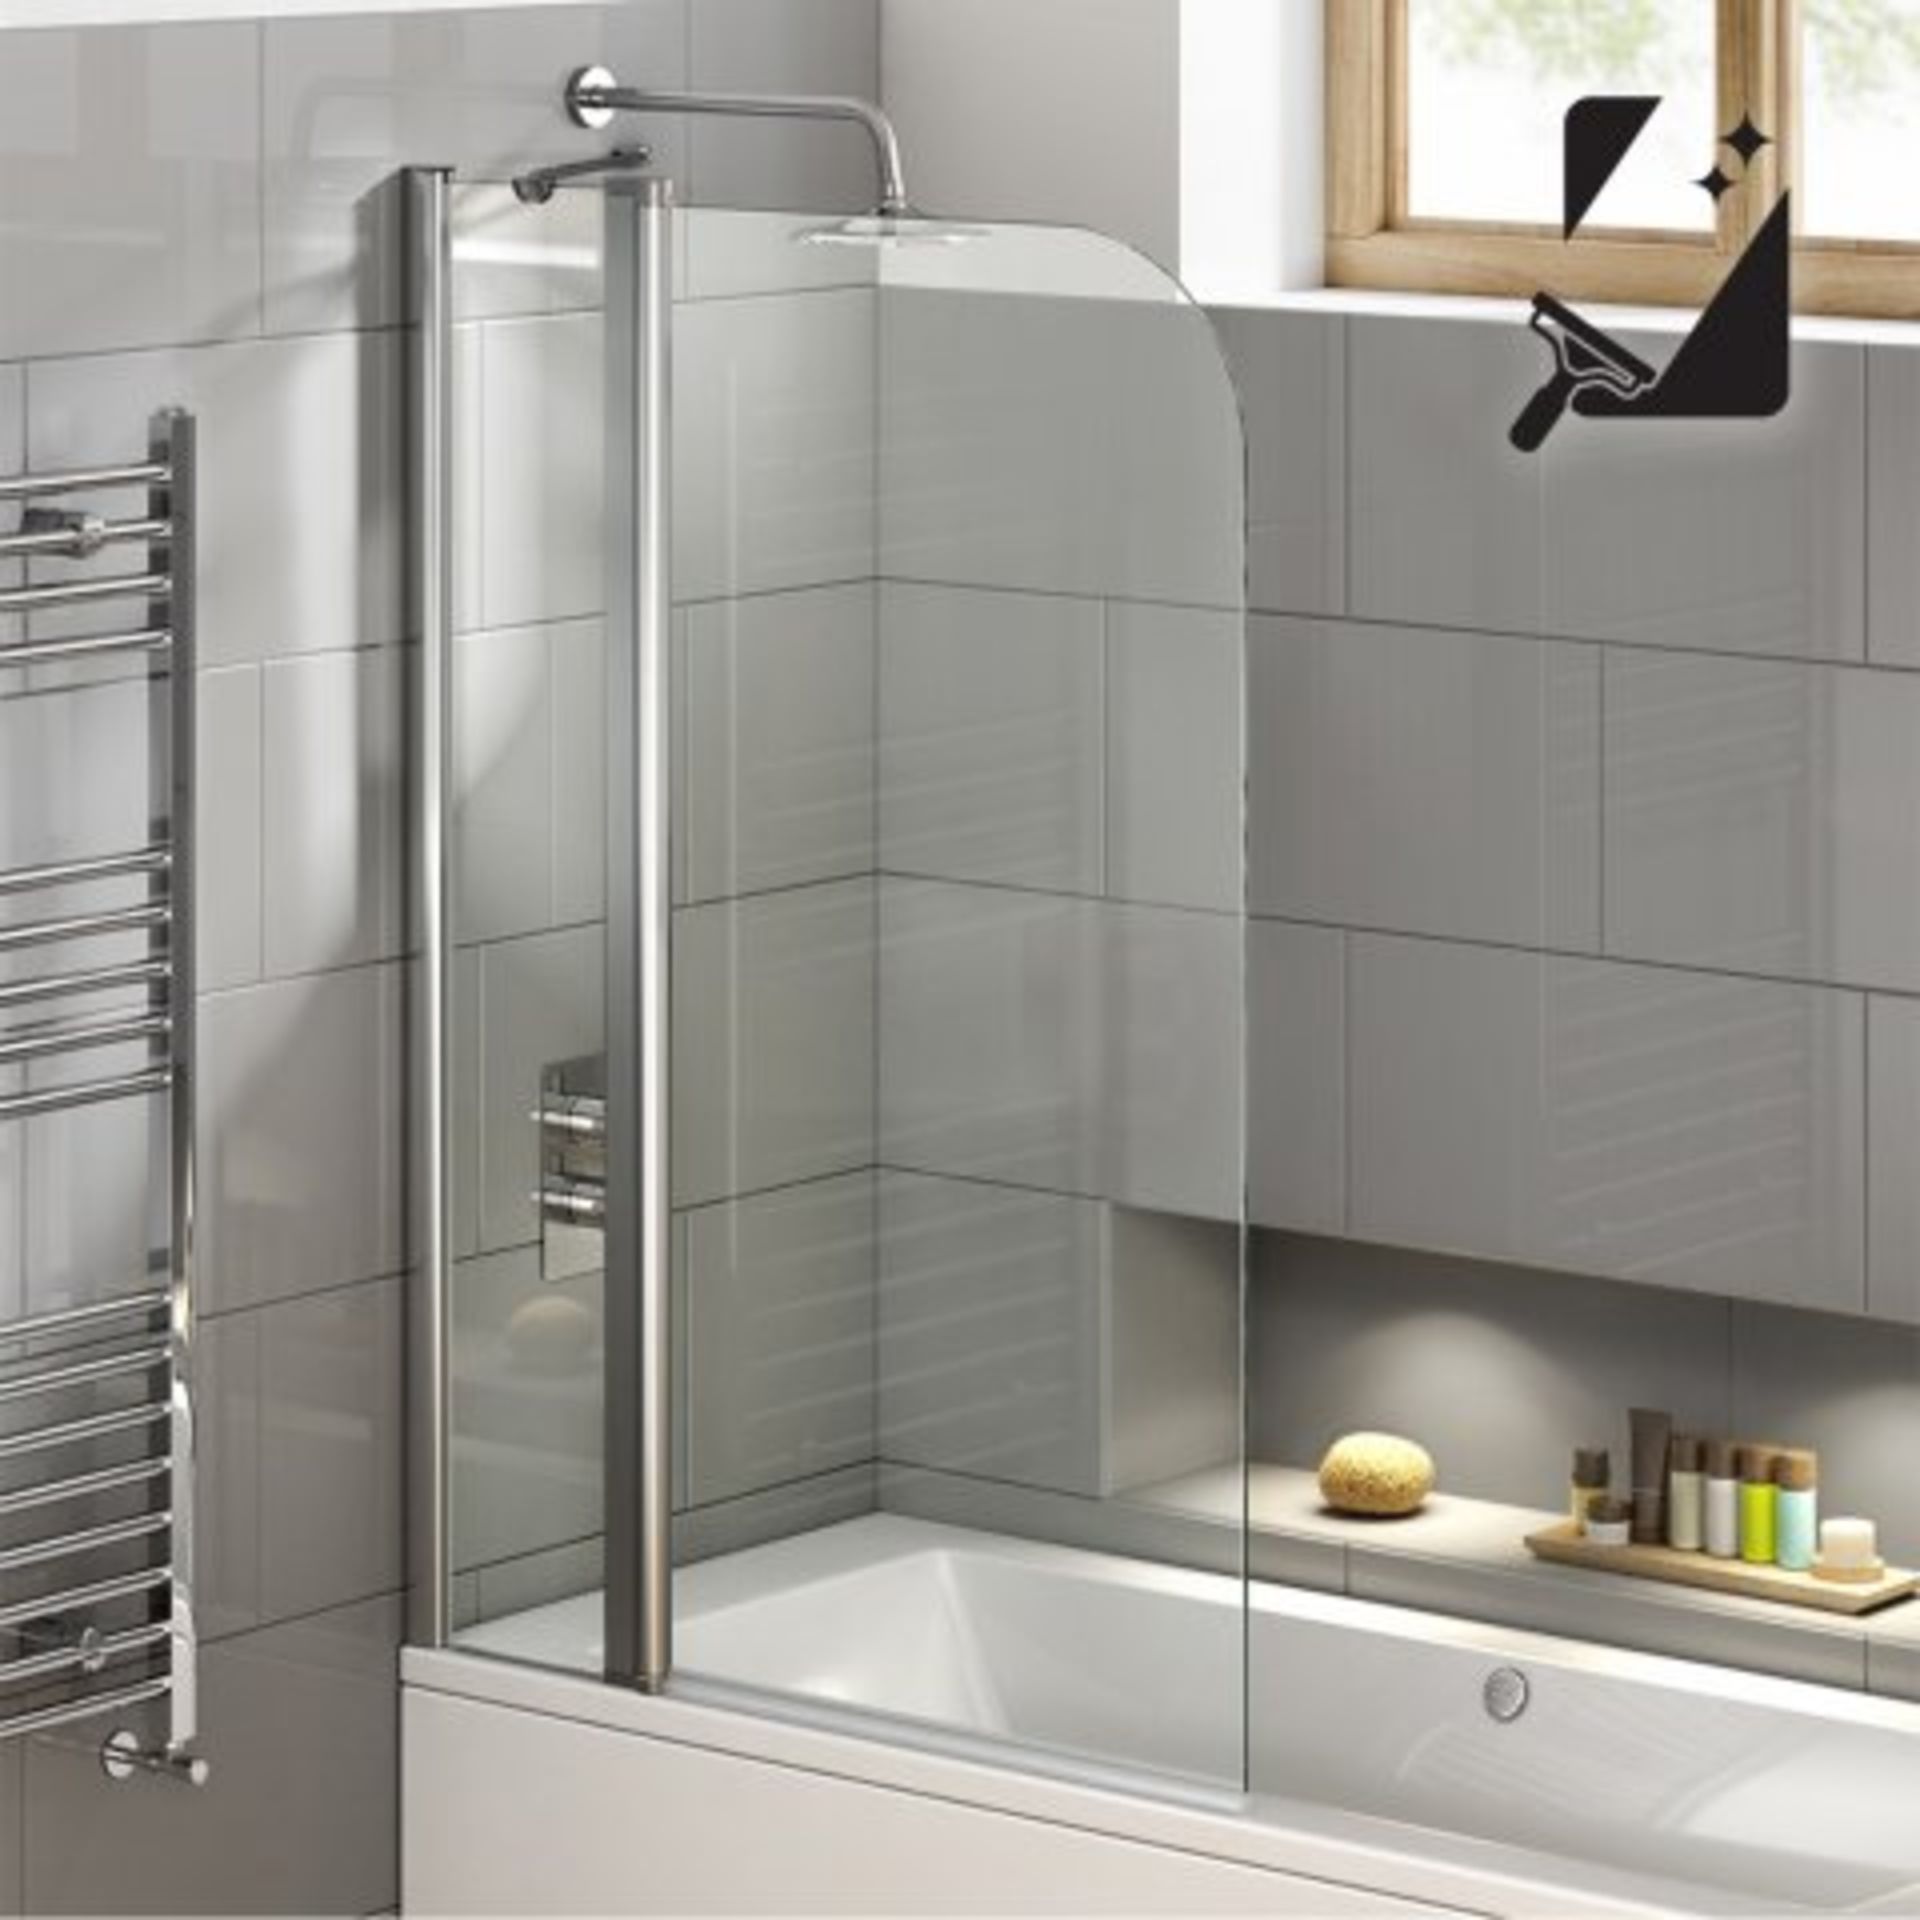 (M109) 1000mm - 6mm - EasyClean Straight Bath Screen. RRP £224.99. The clue is in the name: Easy